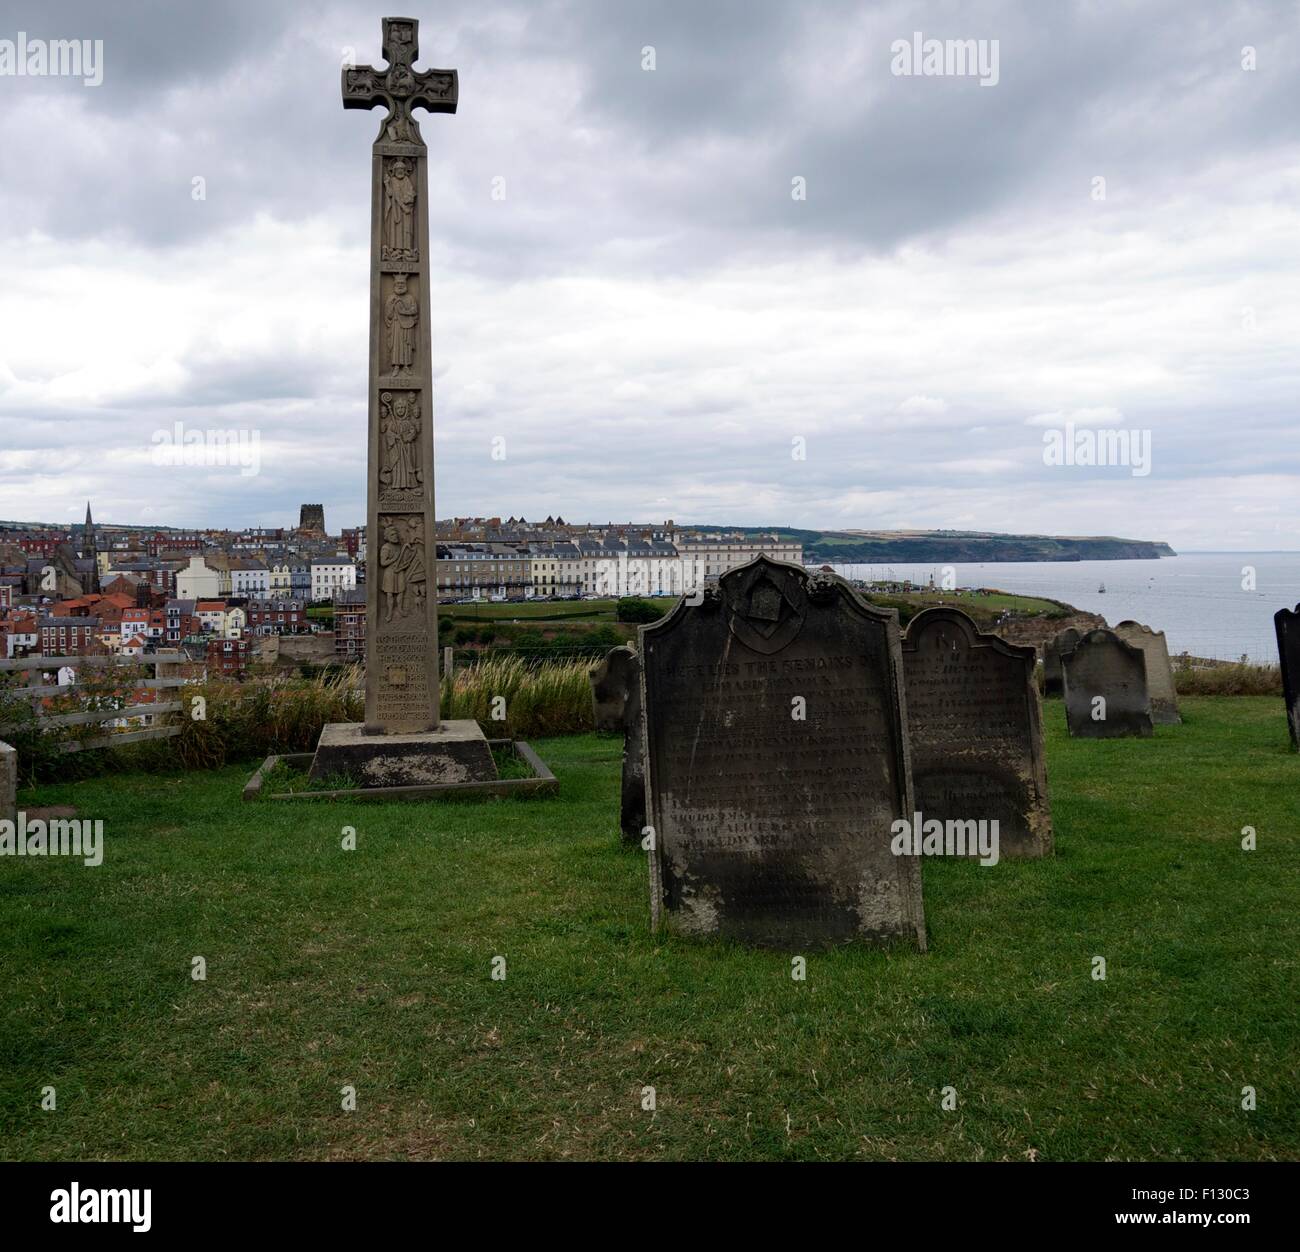 Graveyard at the top of a hill, with Whitby in the background Stock Photo